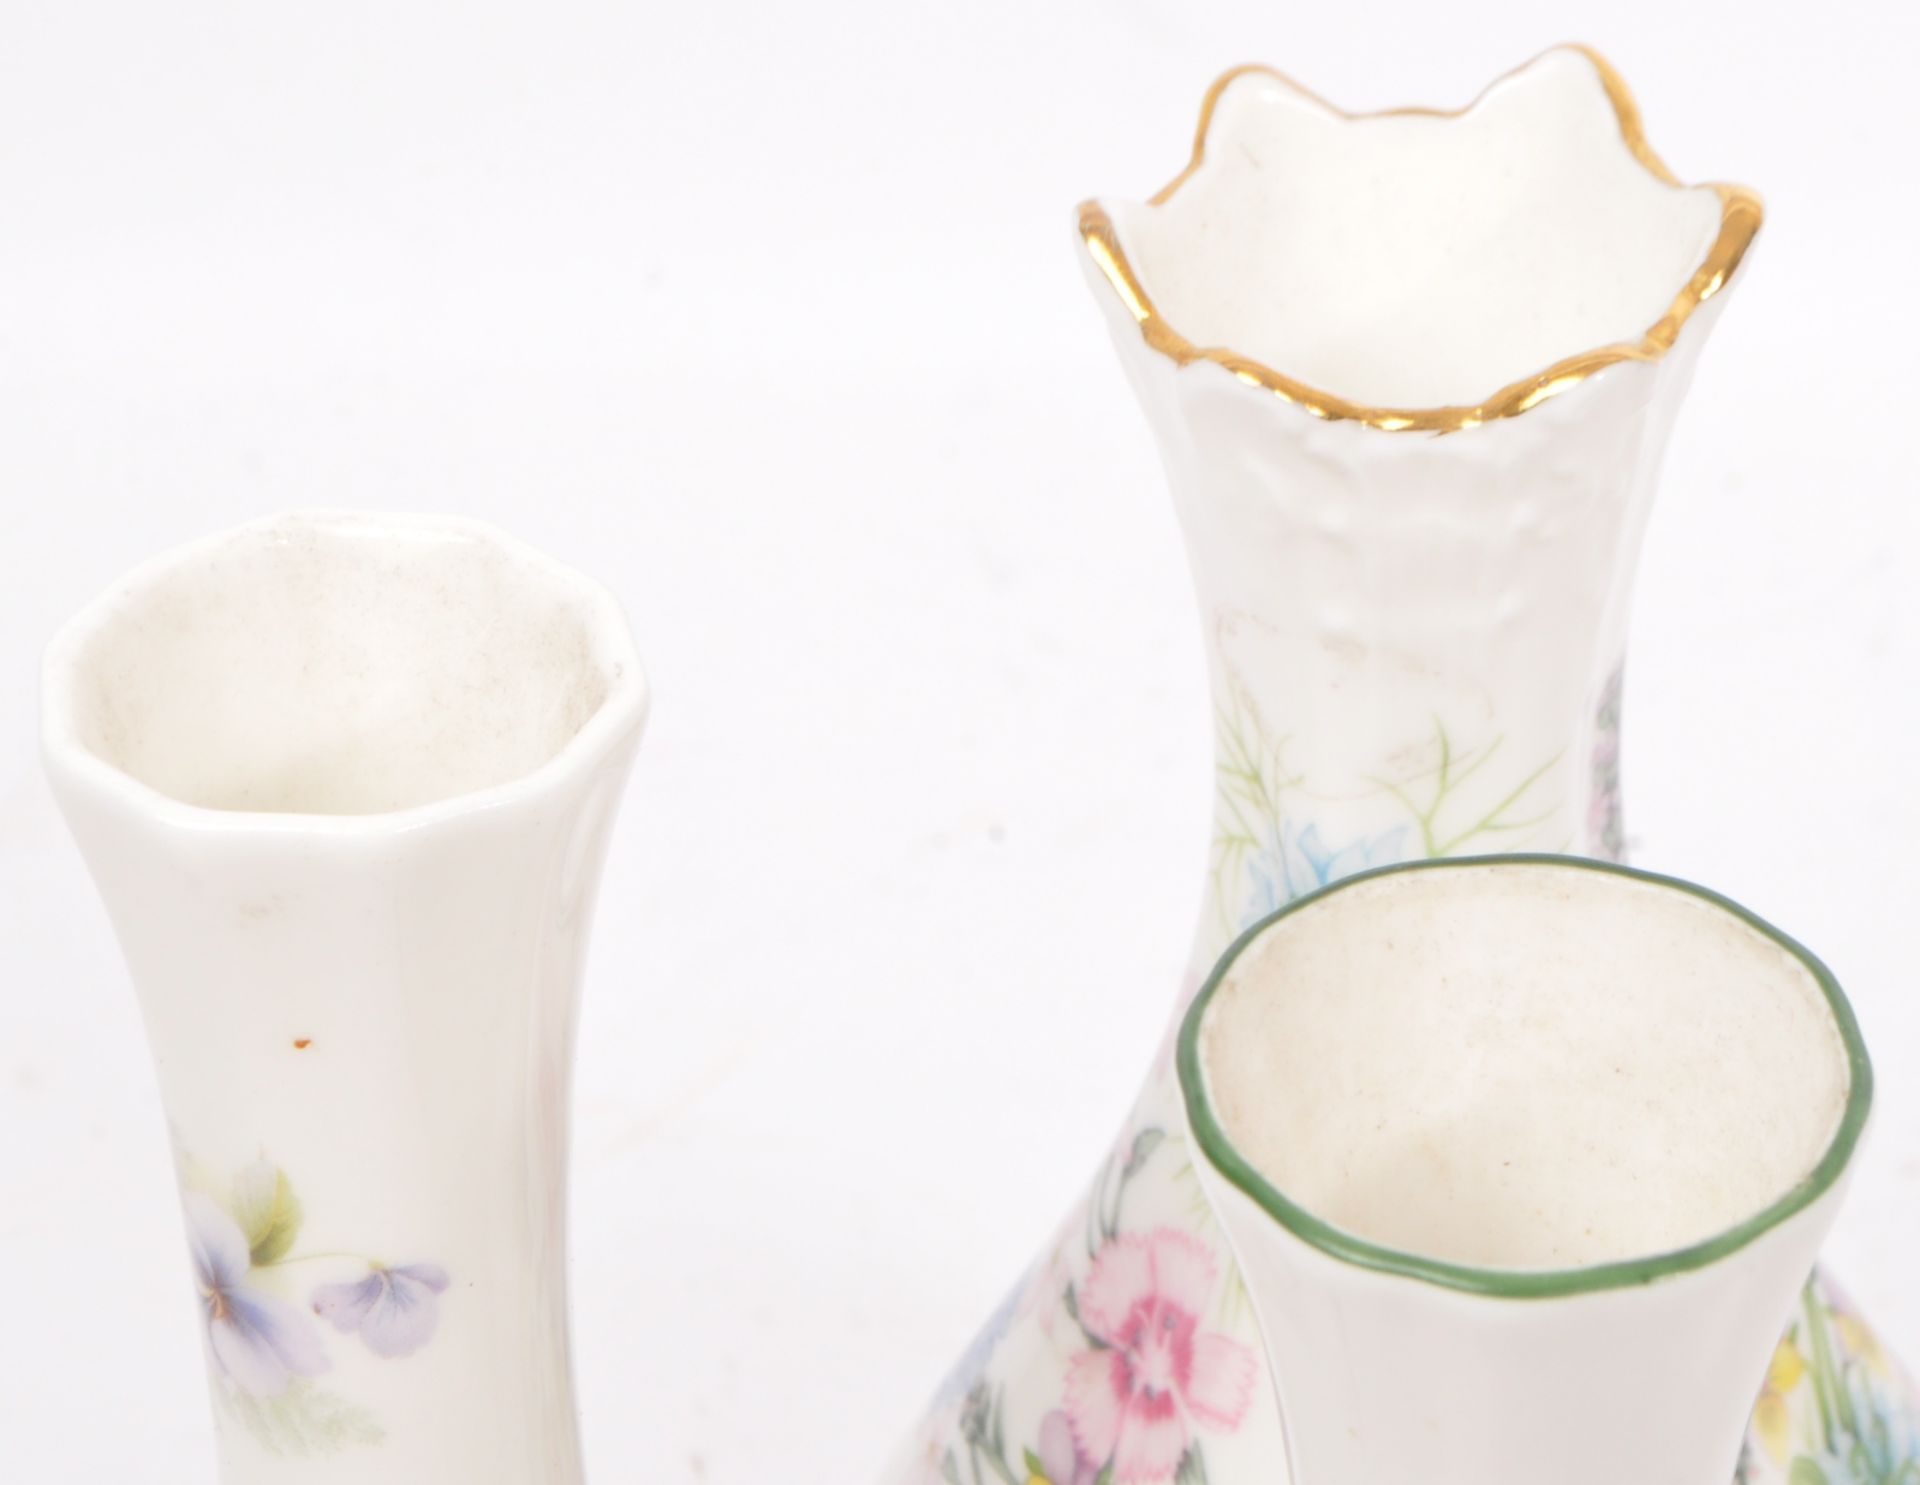 THREE PIECES VINTAGE PORCELAIN CHINA WARE BUD POSEY VASES - Image 5 of 6